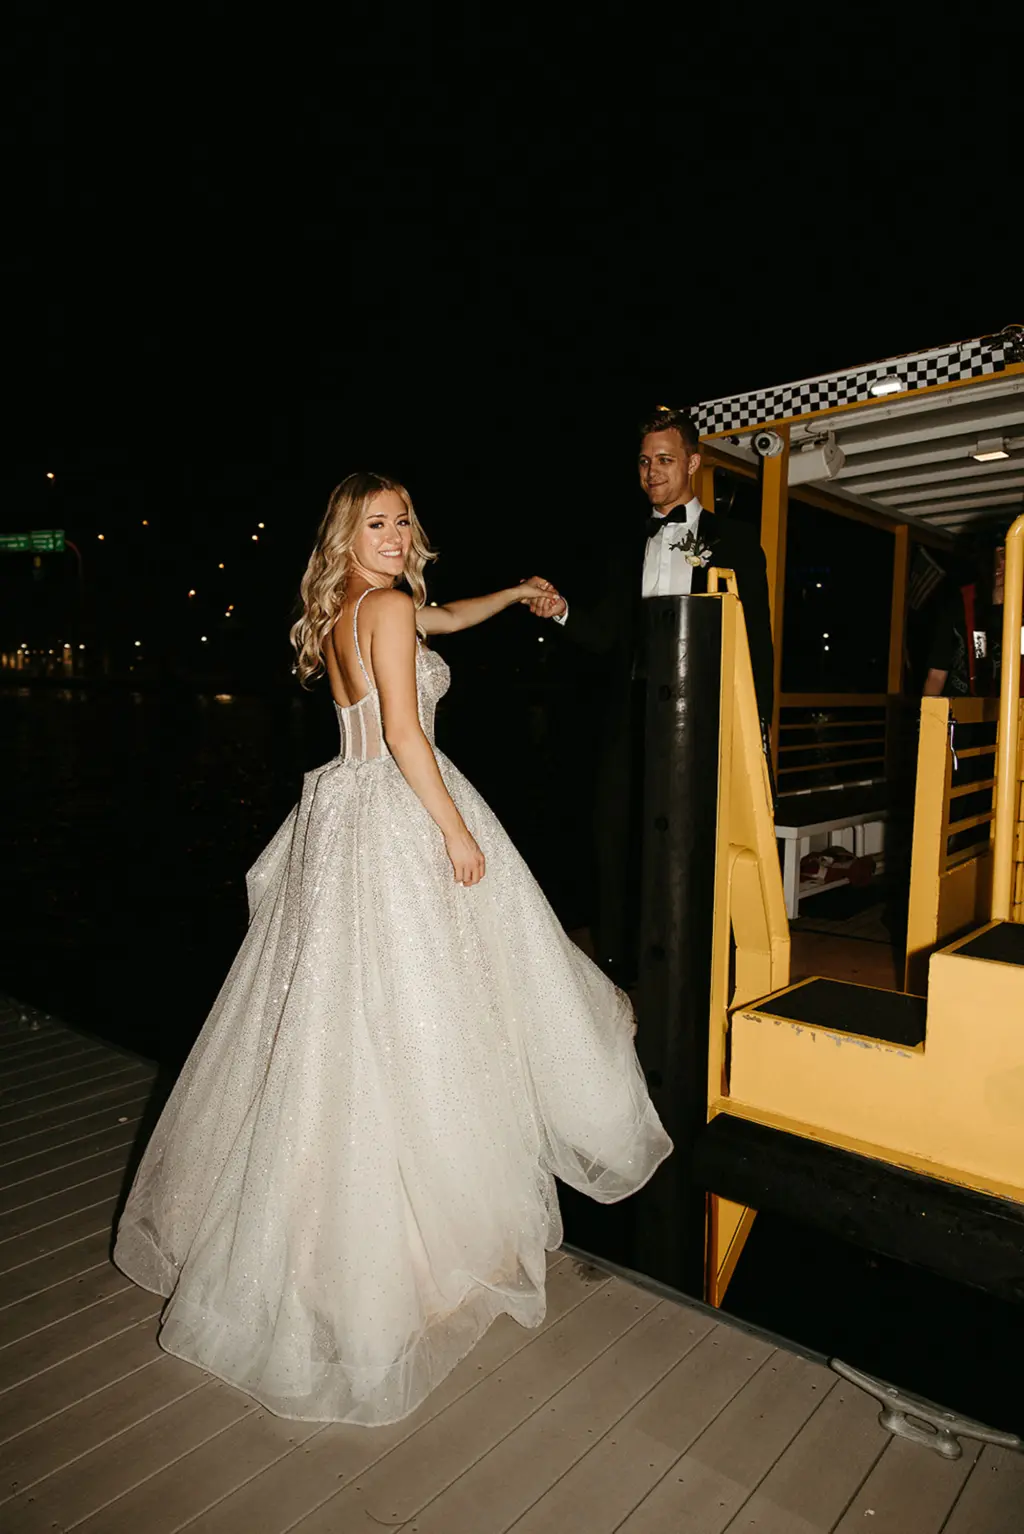 Bride and Groom Wedding Reception Grand Exit | Transportation Pirate Water Taxi